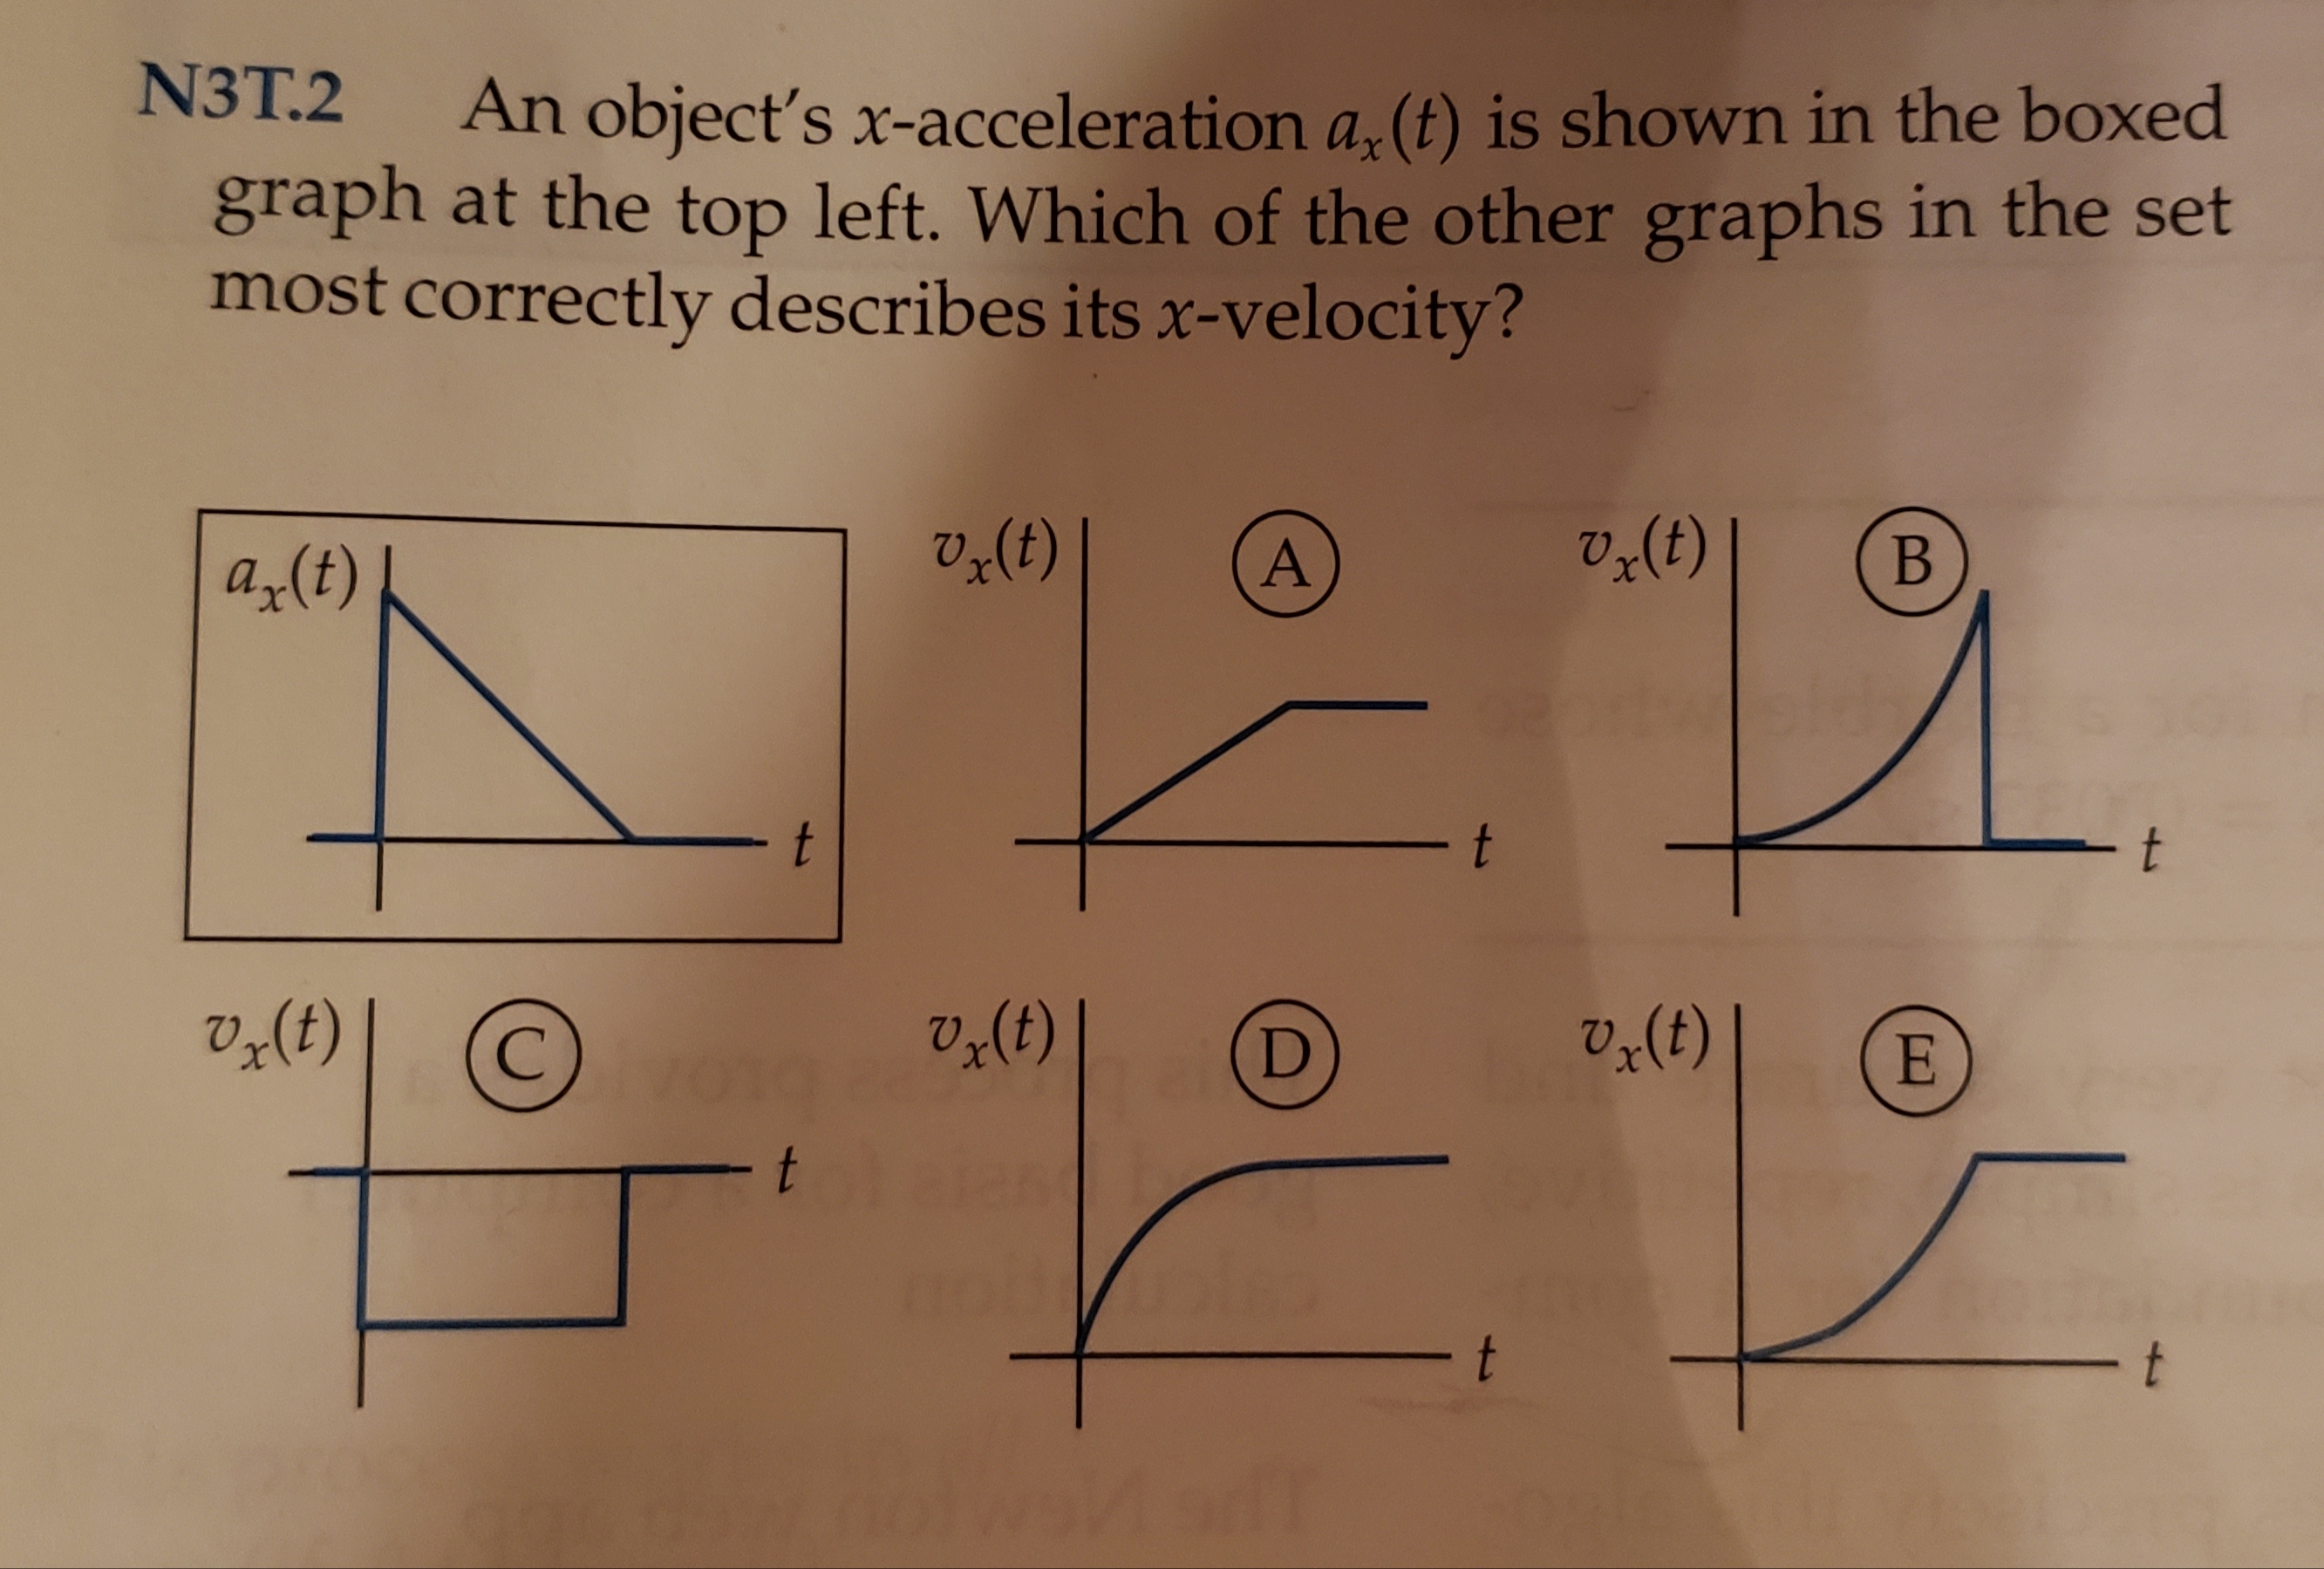 N3T.2
An object's x-acceleration a (t) is shown in the boxed
graph at the top left. Which of the other graphs in the set
most correctly describes its x-velocity?
V2(t)
A
В
ax (t)
- t
t
V&(t)
2(t)
V2(t)
(C
D
E
- t
t
